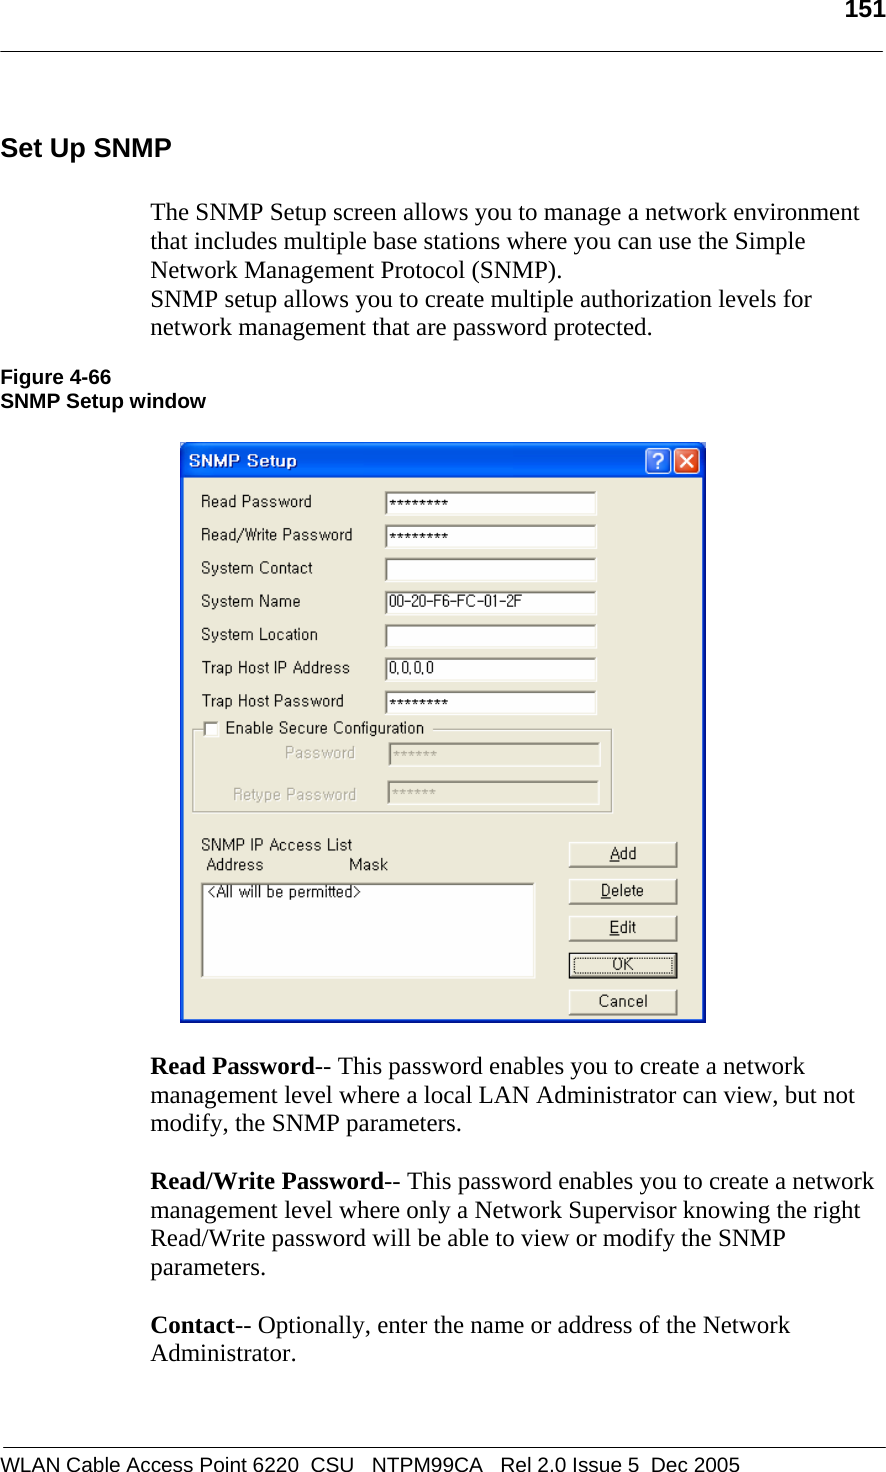   151  WLAN Cable Access Point 6220  CSU   NTPM99CA   Rel 2.0 Issue 5  Dec 2005 Set Up SNMP  The SNMP Setup screen allows you to manage a network environment that includes multiple base stations where you can use the Simple Network Management Protocol (SNMP).  SNMP setup allows you to create multiple authorization levels for network management that are password protected.  Figure 4-66 SNMP Setup window    Read Password-- This password enables you to create a network management level where a local LAN Administrator can view, but not modify, the SNMP parameters.  Read/Write Password-- This password enables you to create a network management level where only a Network Supervisor knowing the right Read/Write password will be able to view or modify the SNMP parameters.  Contact-- Optionally, enter the name or address of the Network Administrator.   